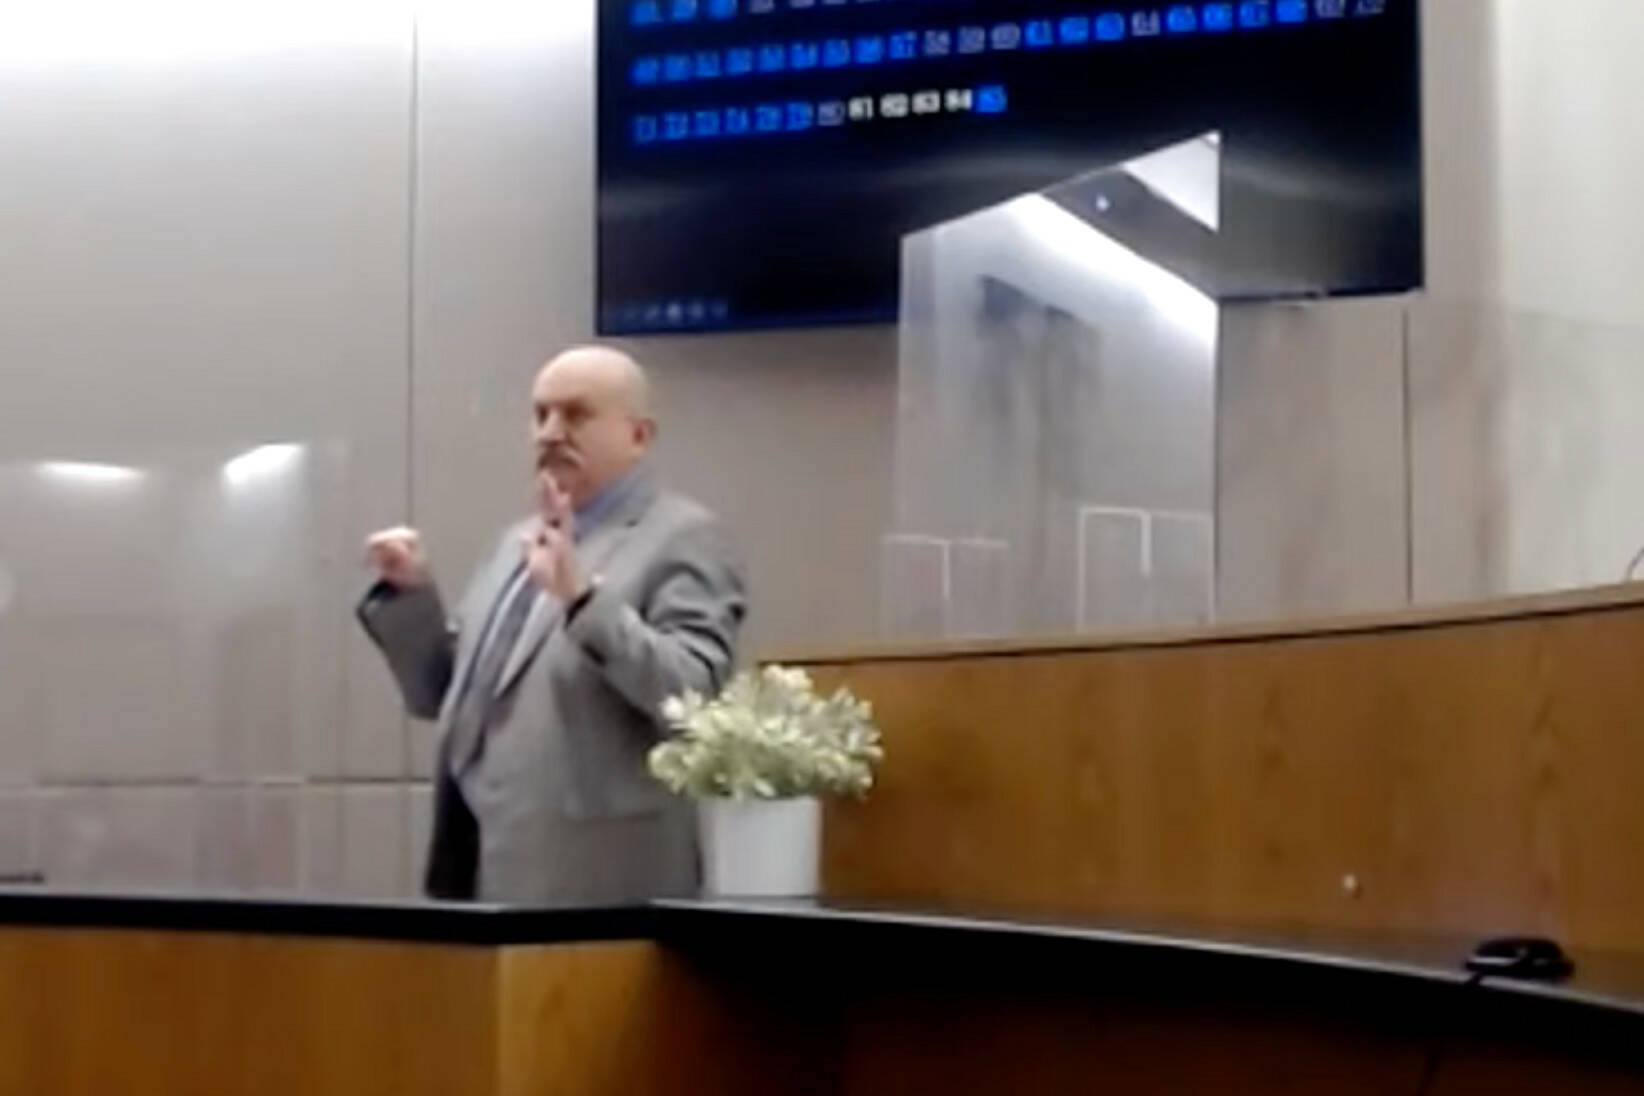 Ted Nordgaarden of the Alaska Bureau of Investigation imitates the gesture made by the defendant during the trial of a man charged with killing another man in Yakutat in 2018. (Screenshot)